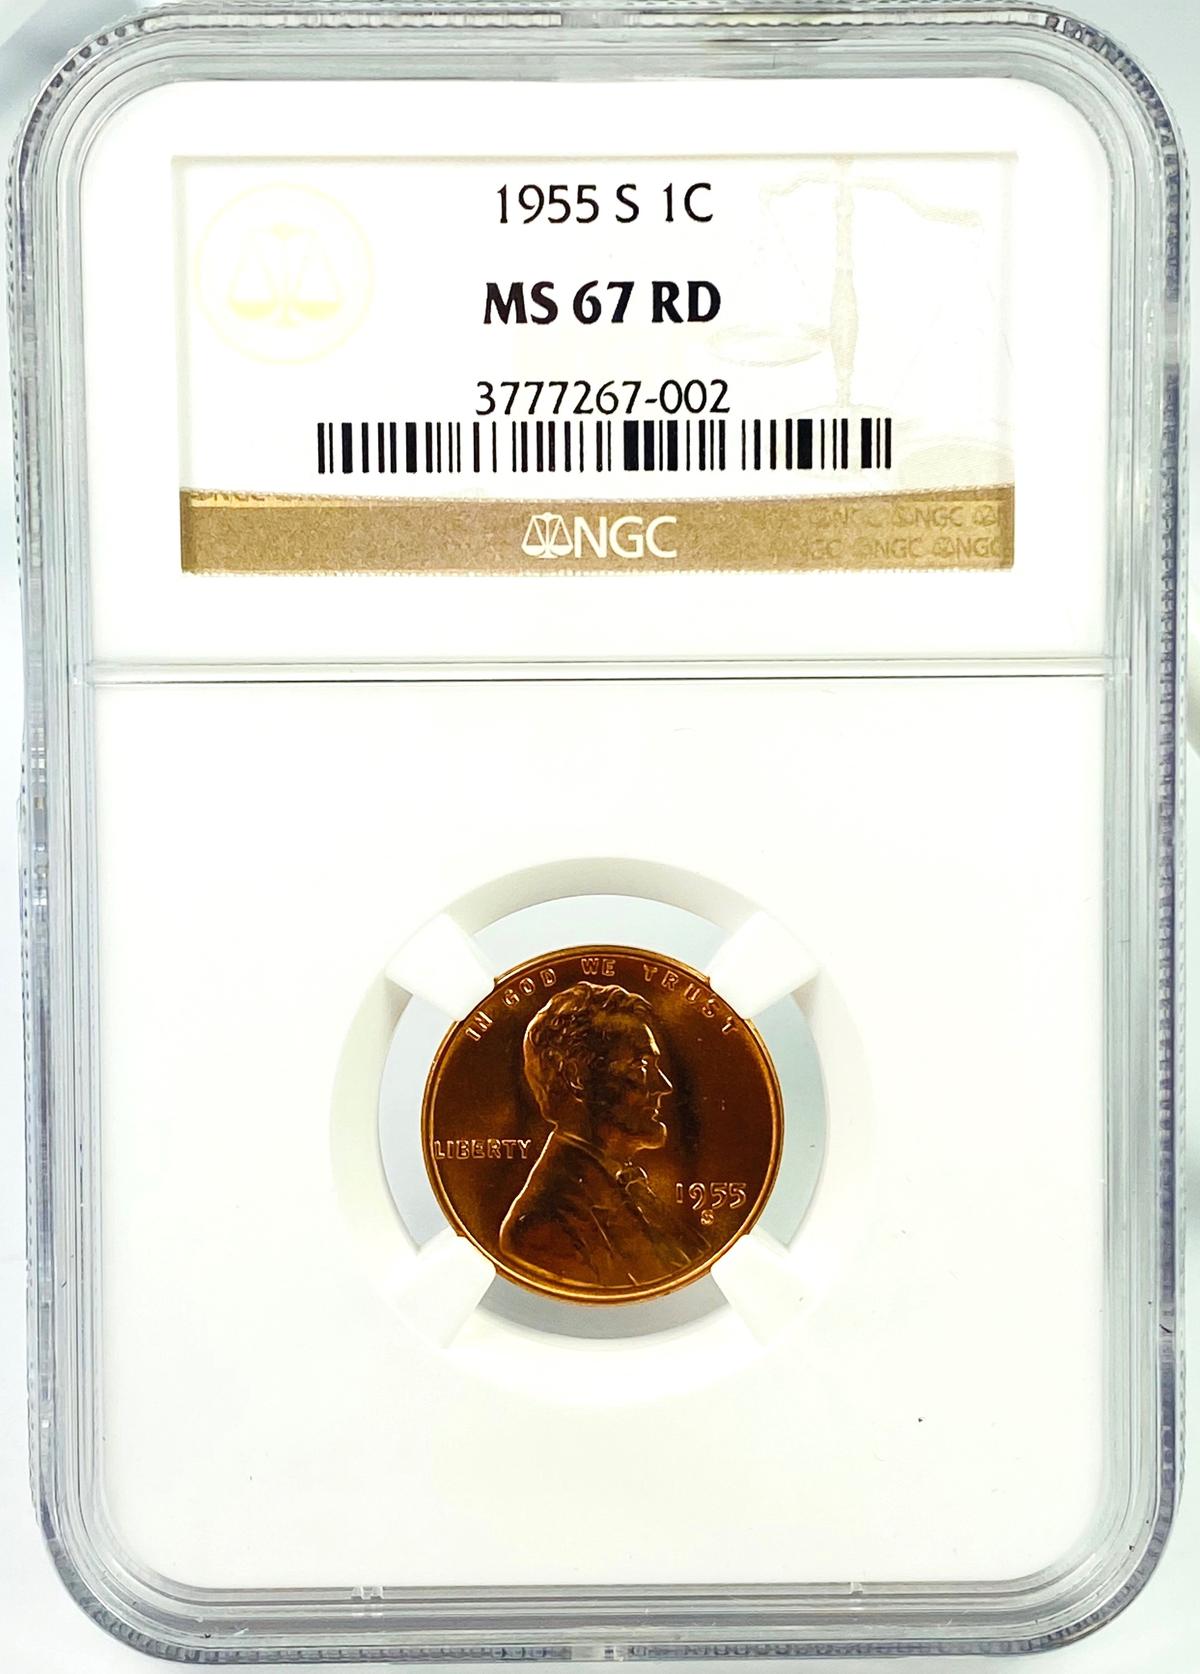 Certified 1955-S U.S. Lincoln cent